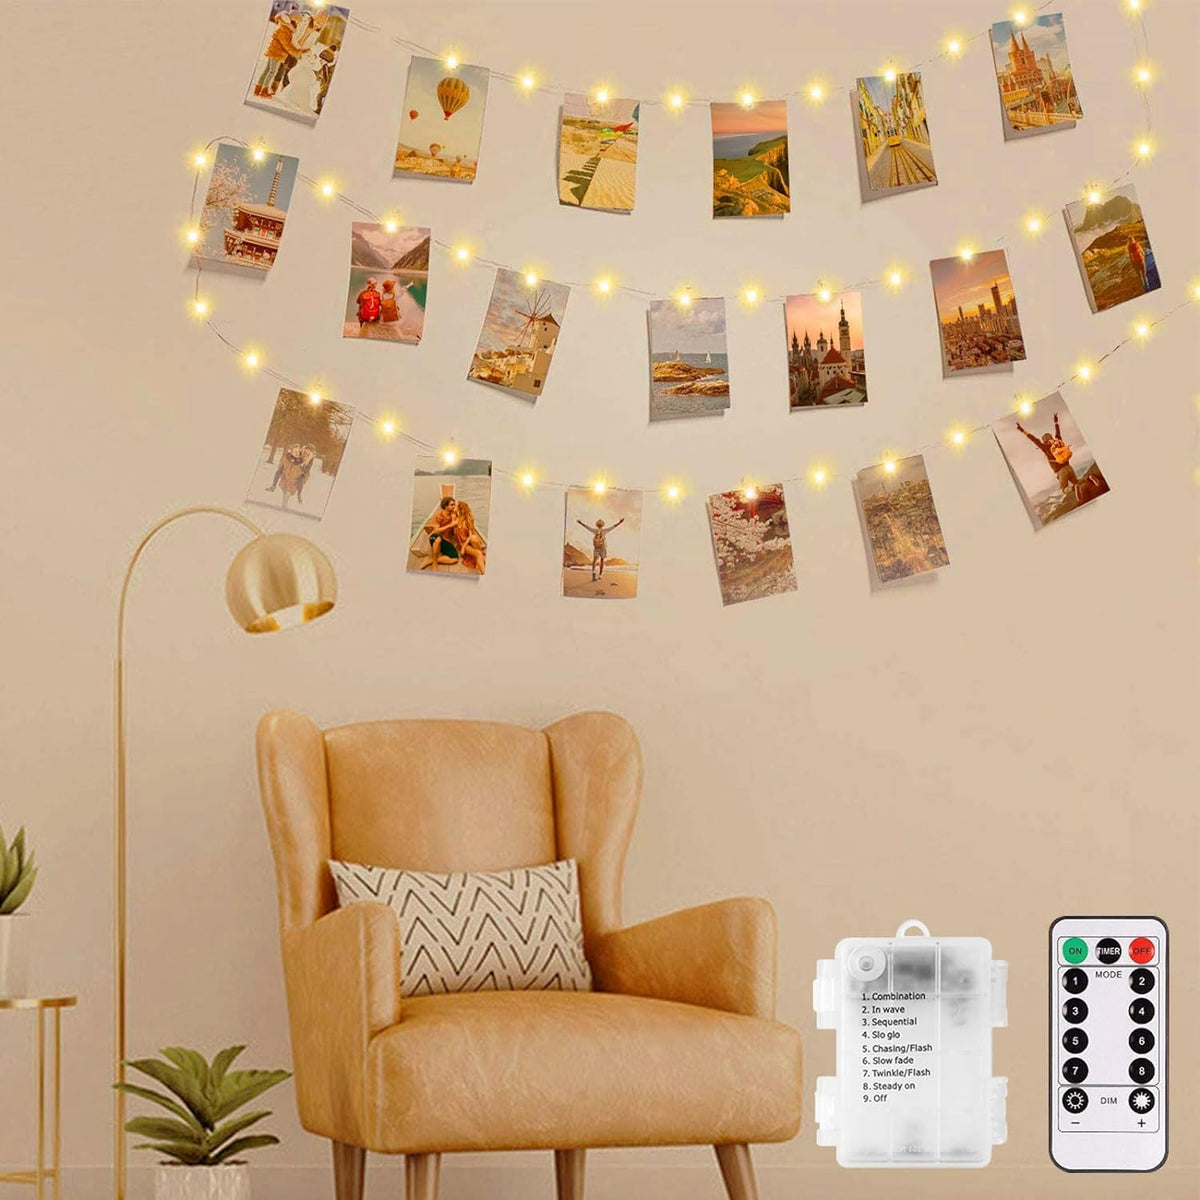 LECLSTAR 50 LED Photo Clips String Lights, 17ft with Remote - 8 Modes Fairy  Lights to Clip on Pictures, Photos, Cards